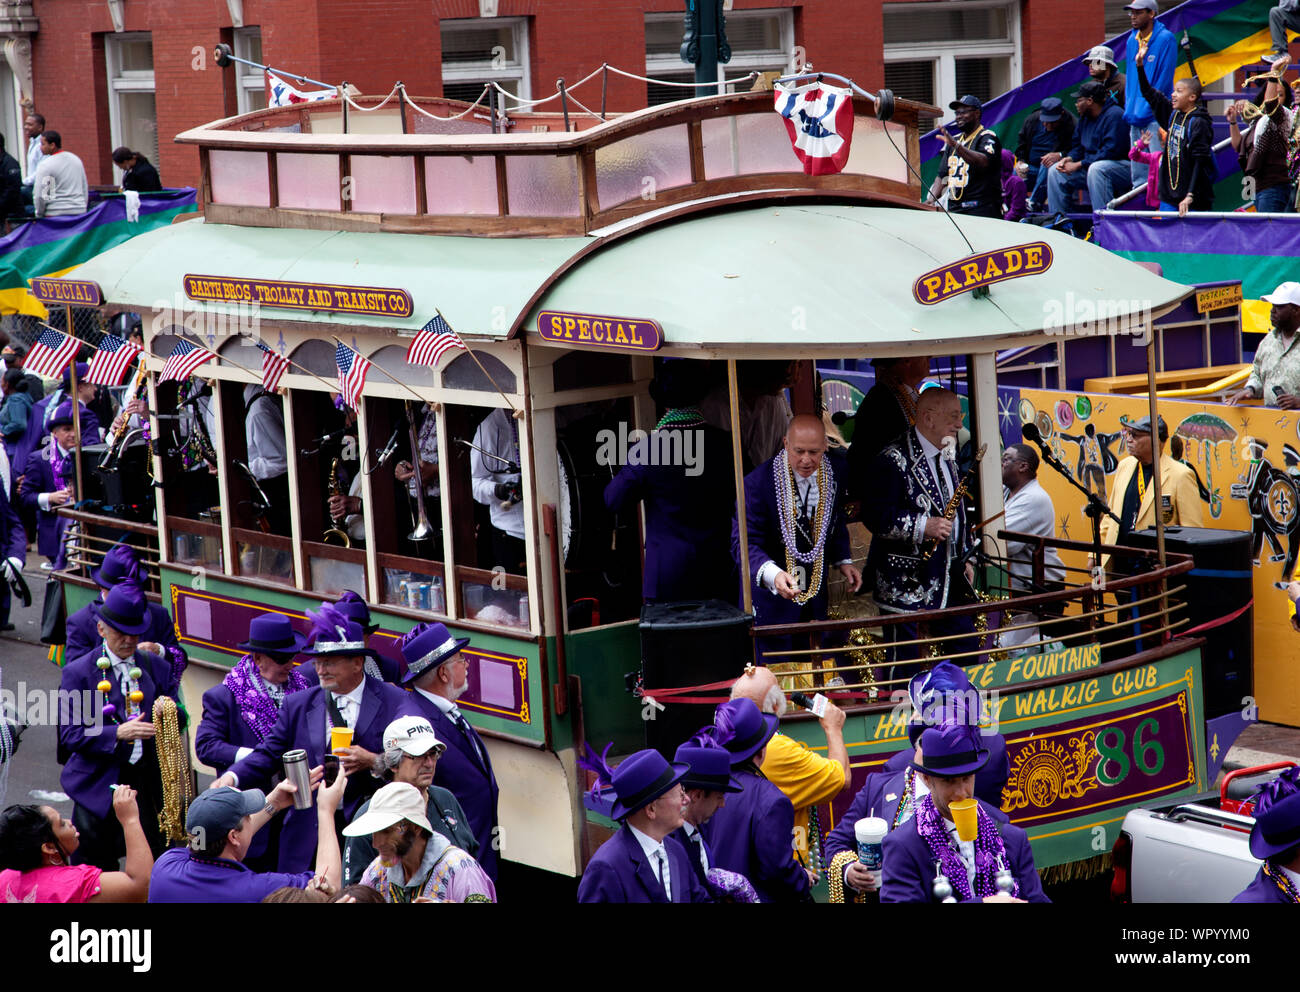 Mardi Gras Parade, New Orleans, Louisiana.   Mardi Gras Day 2011 in New Orleans. Pete Fountain's Half-Fast Marching Club Parade.  Band float in shape of a streetcar; Pete Fountain is at front right. Stock Photo